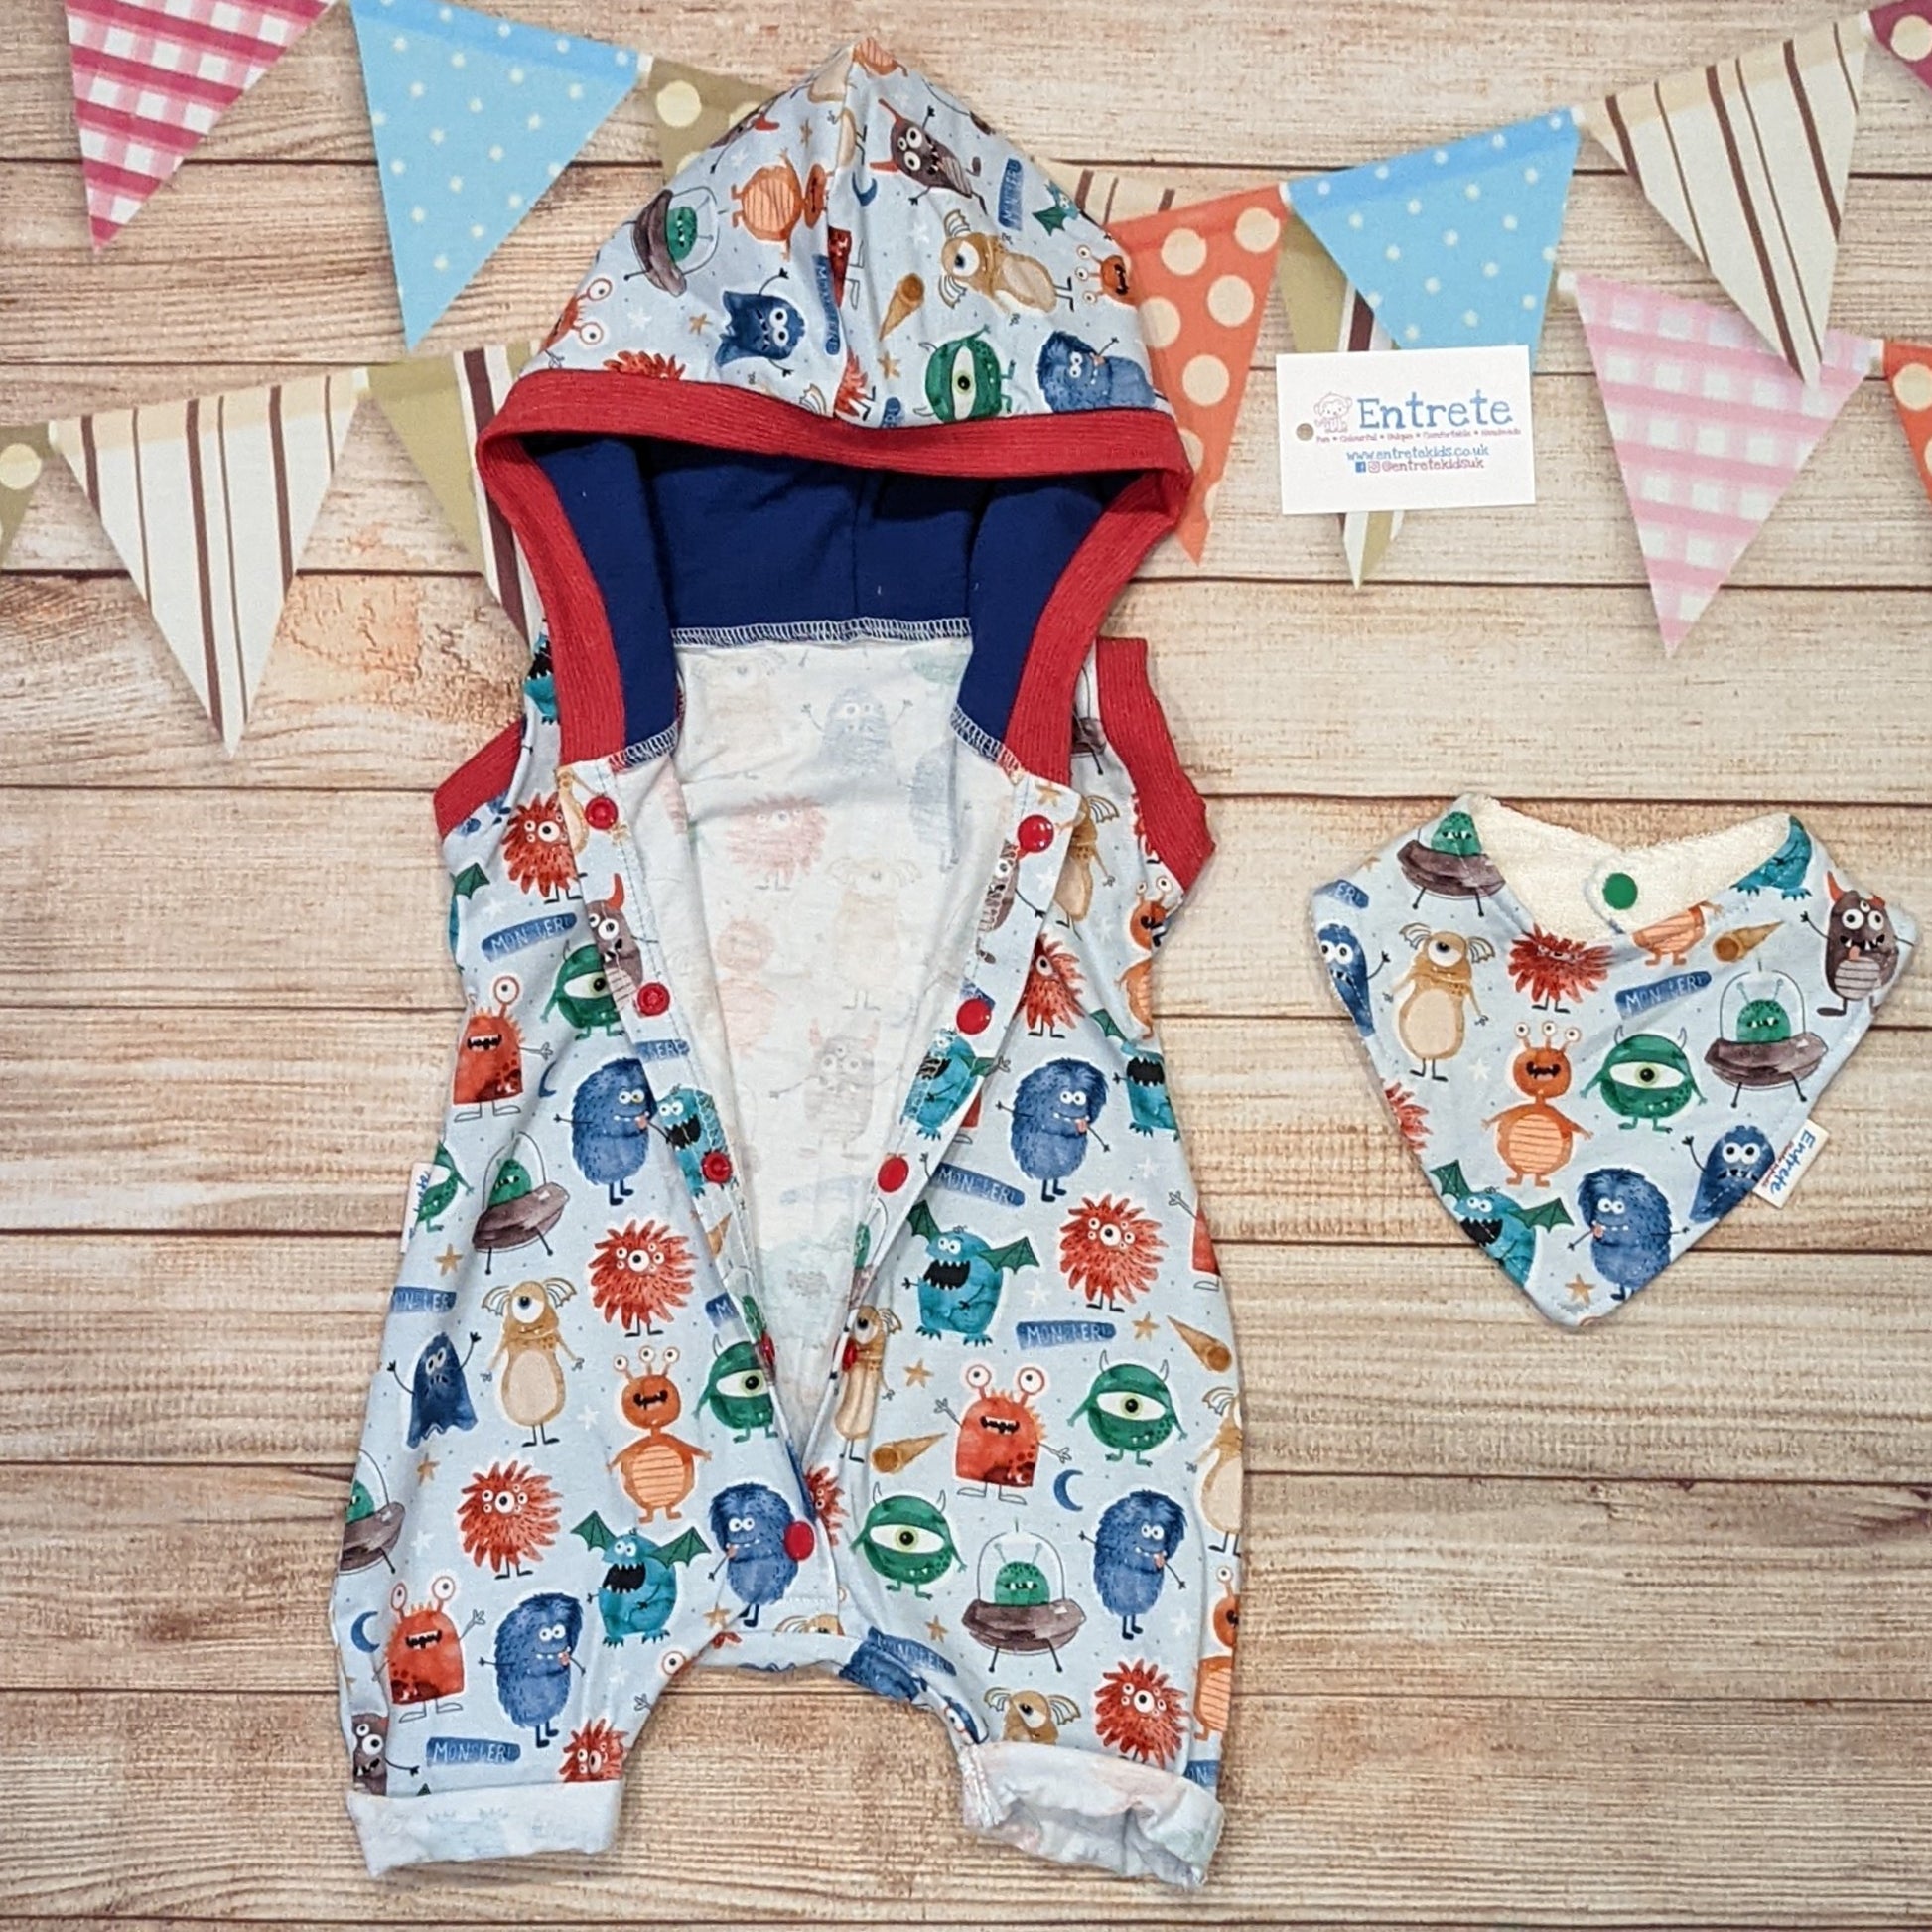 The insanely fun monsters hooded bummie romper, just what your little monster needs this summer! Handmade using pale blue monsters organic cotton Jersey, royal blue cotton jersey and red cotton ribbing. Shown with the front popper entry open and with a matching bamboo bib.